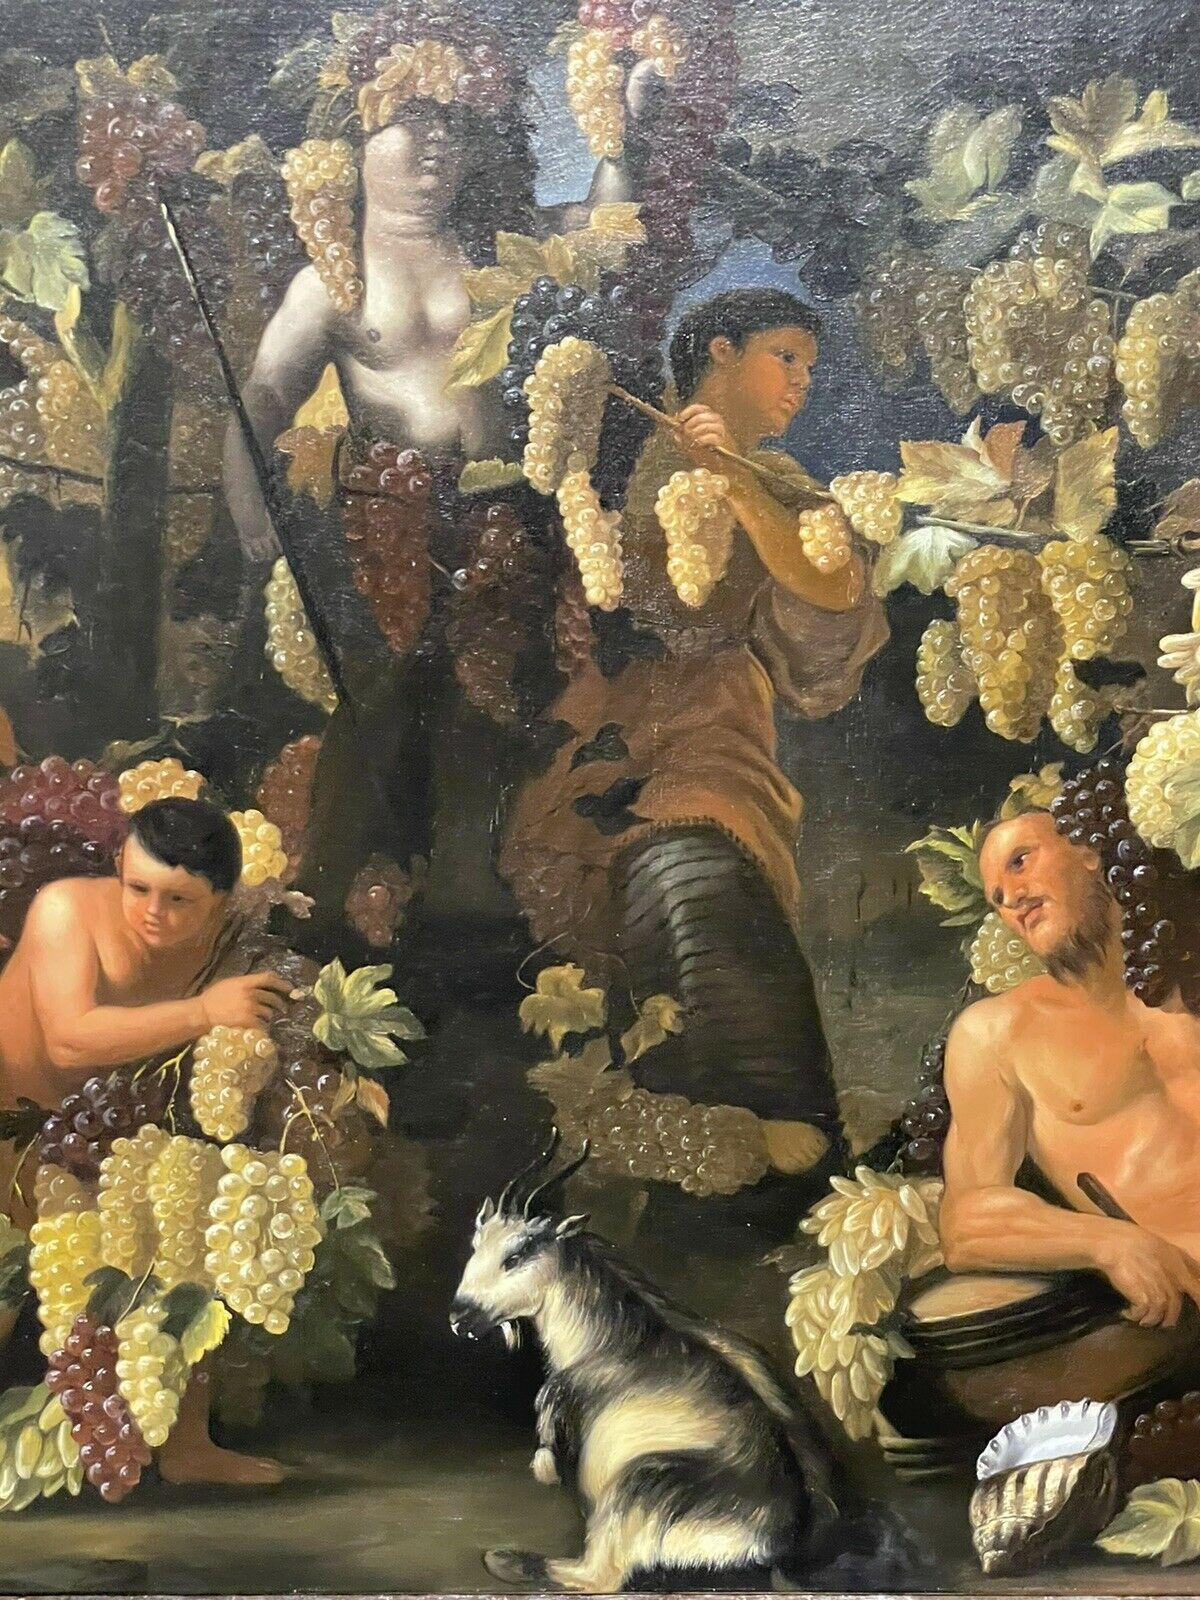 Artist/ School: Continental School, late 20th century

Title: The Grape Harvest, bacchanalian figurative scene

Medium:  oil painting on canvas, unframed

Size:  painting: 24 x 36 inches

Provenance: from a private collection in England.

Condition: